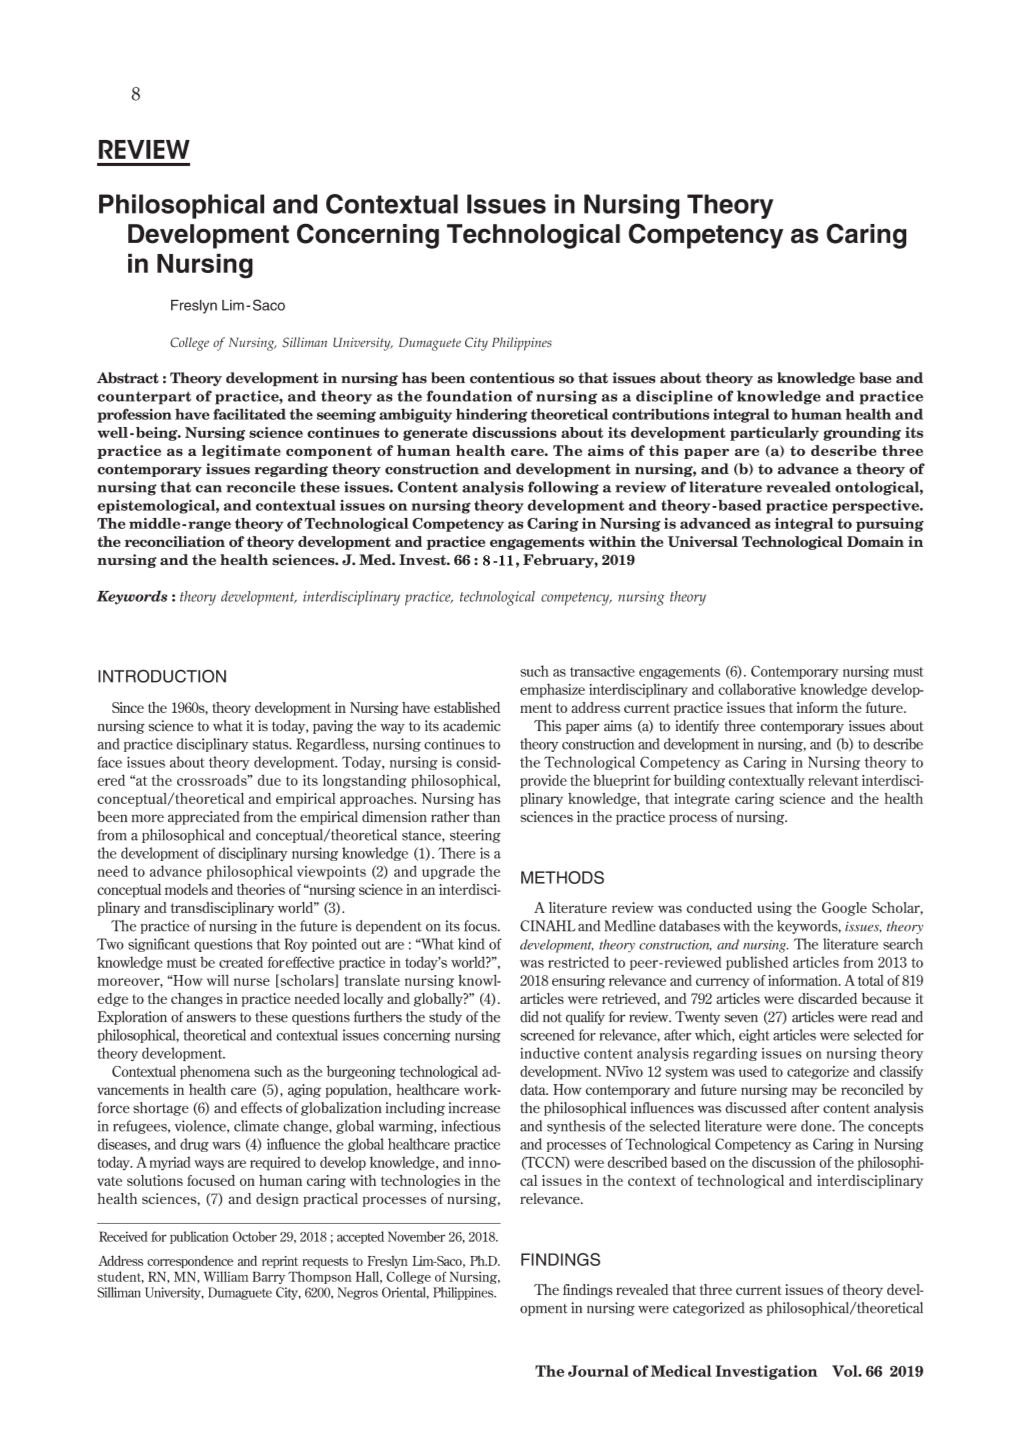 Philosophical and Contextual Issues in Nursing Theory Development